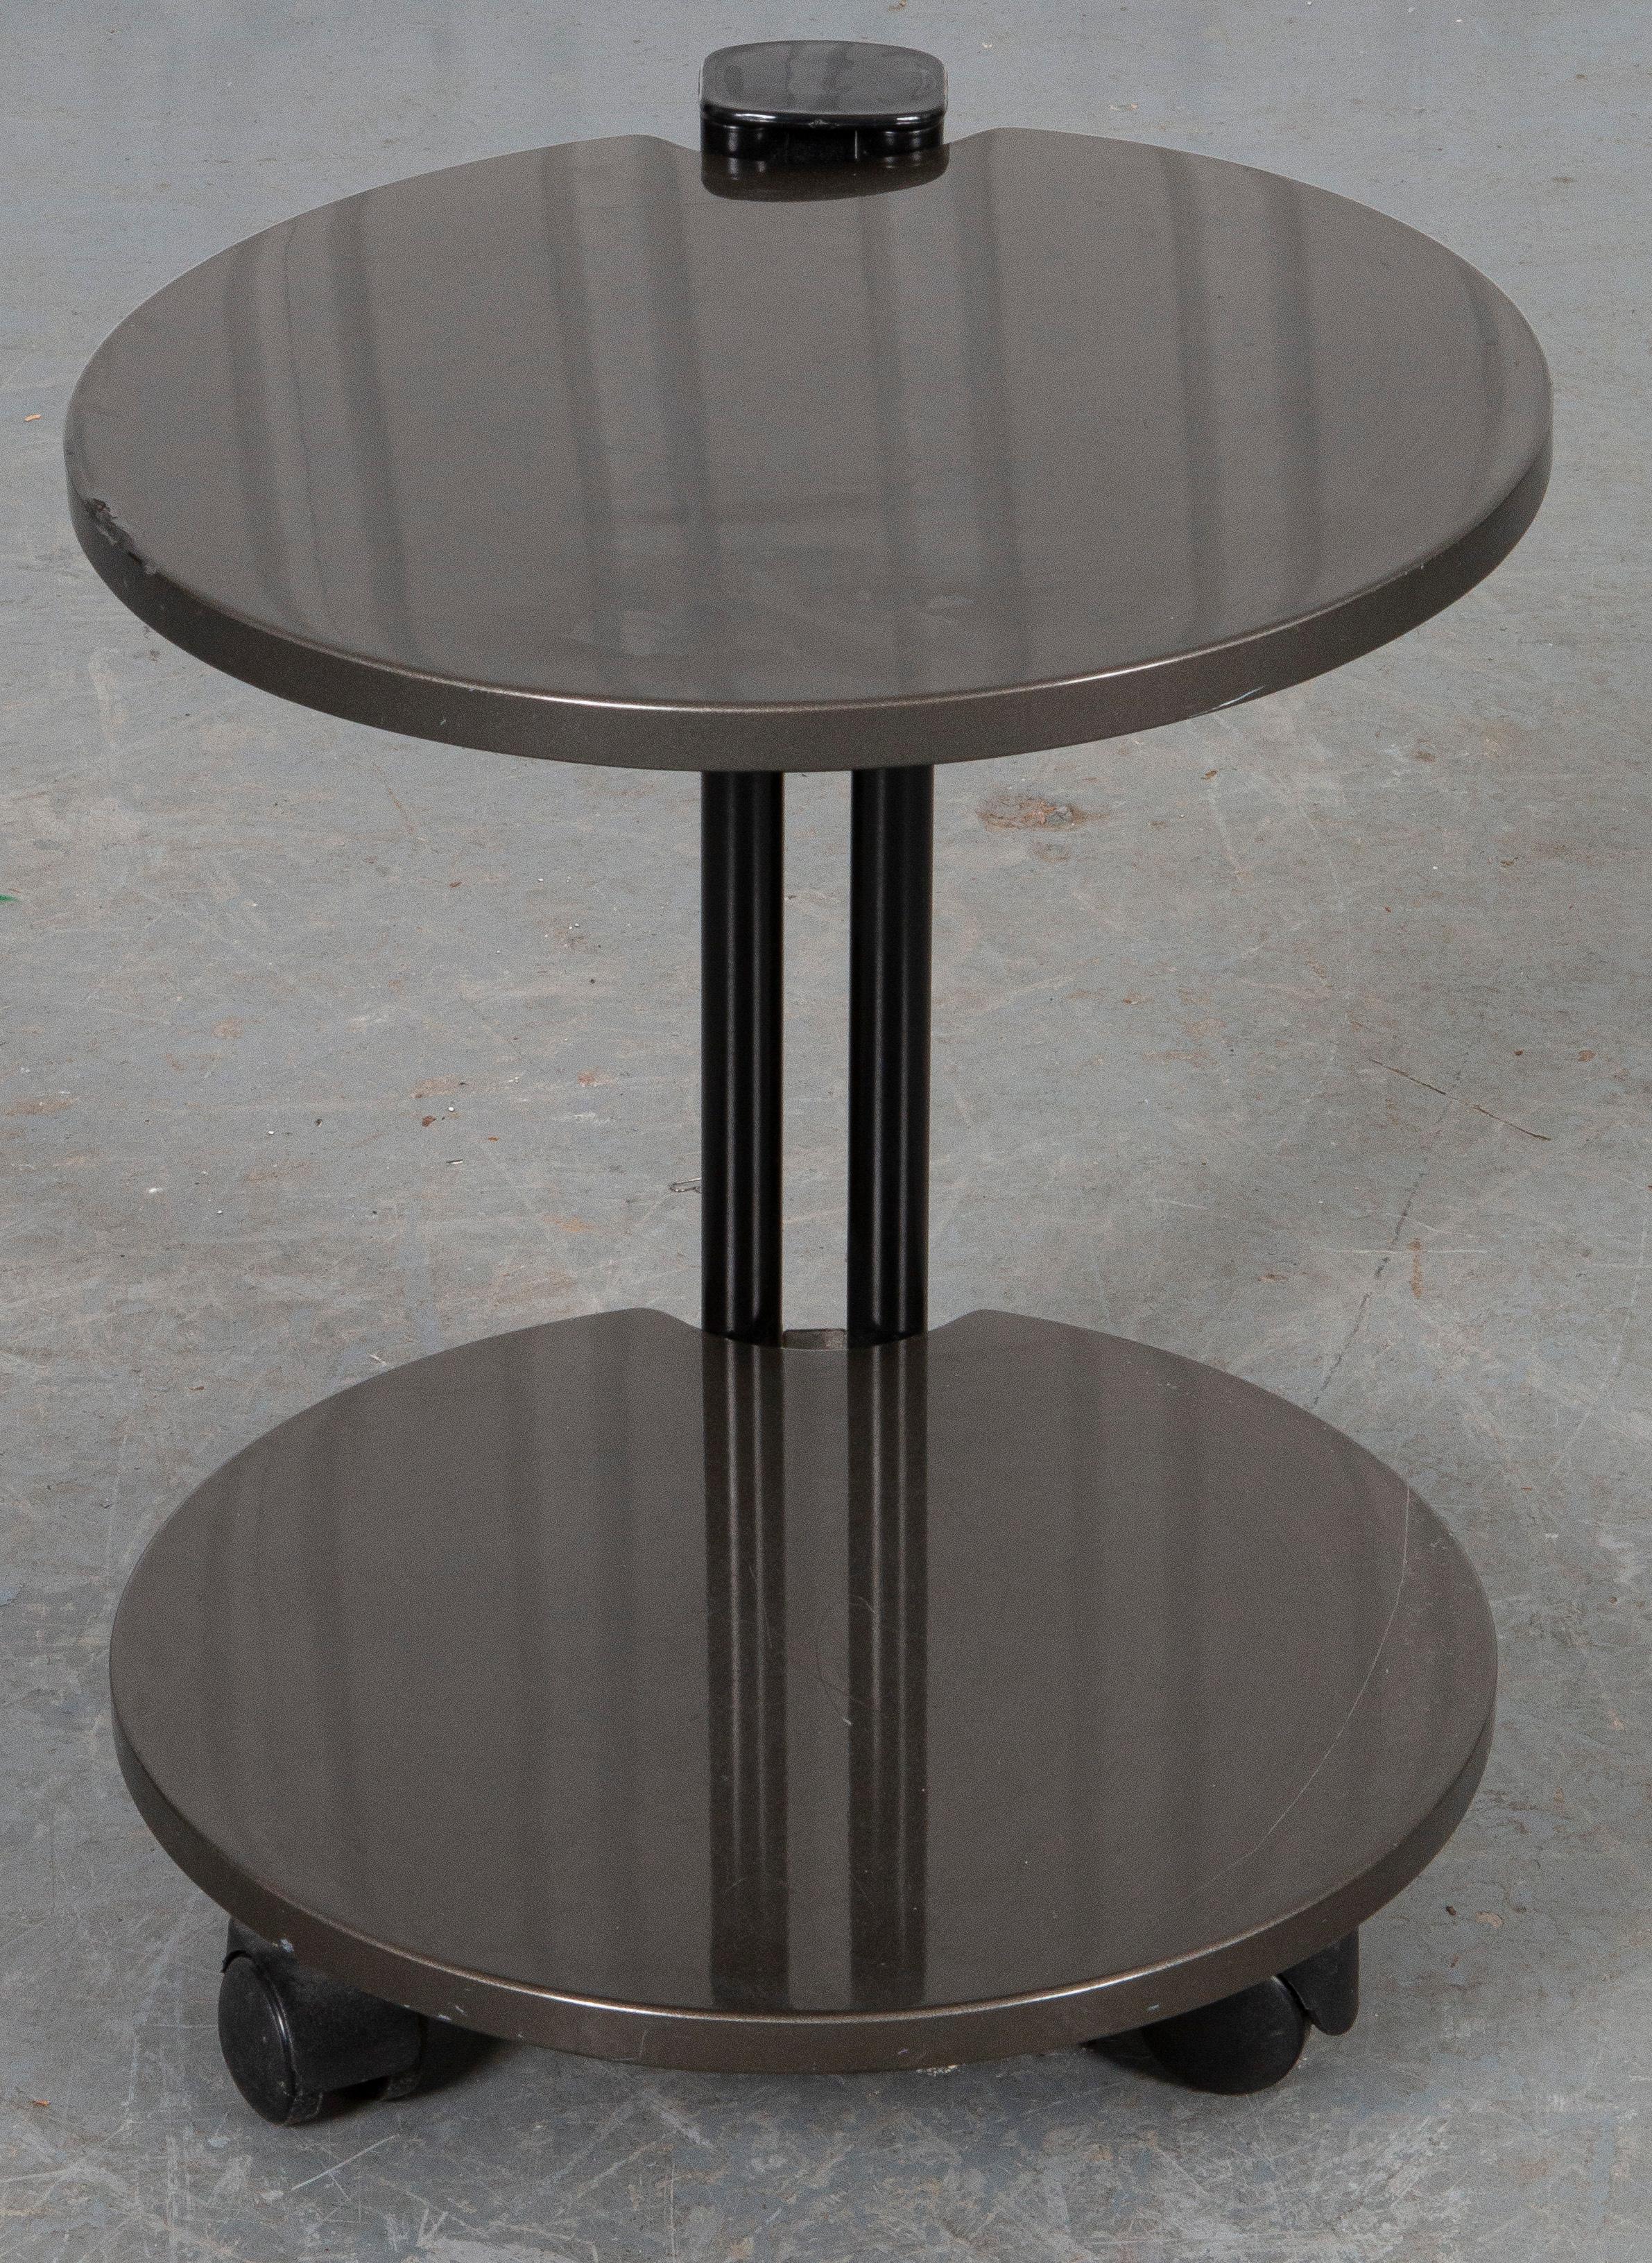 Post-Modern mixed media two tier side table, the round top and lower tier suspended by a column support.